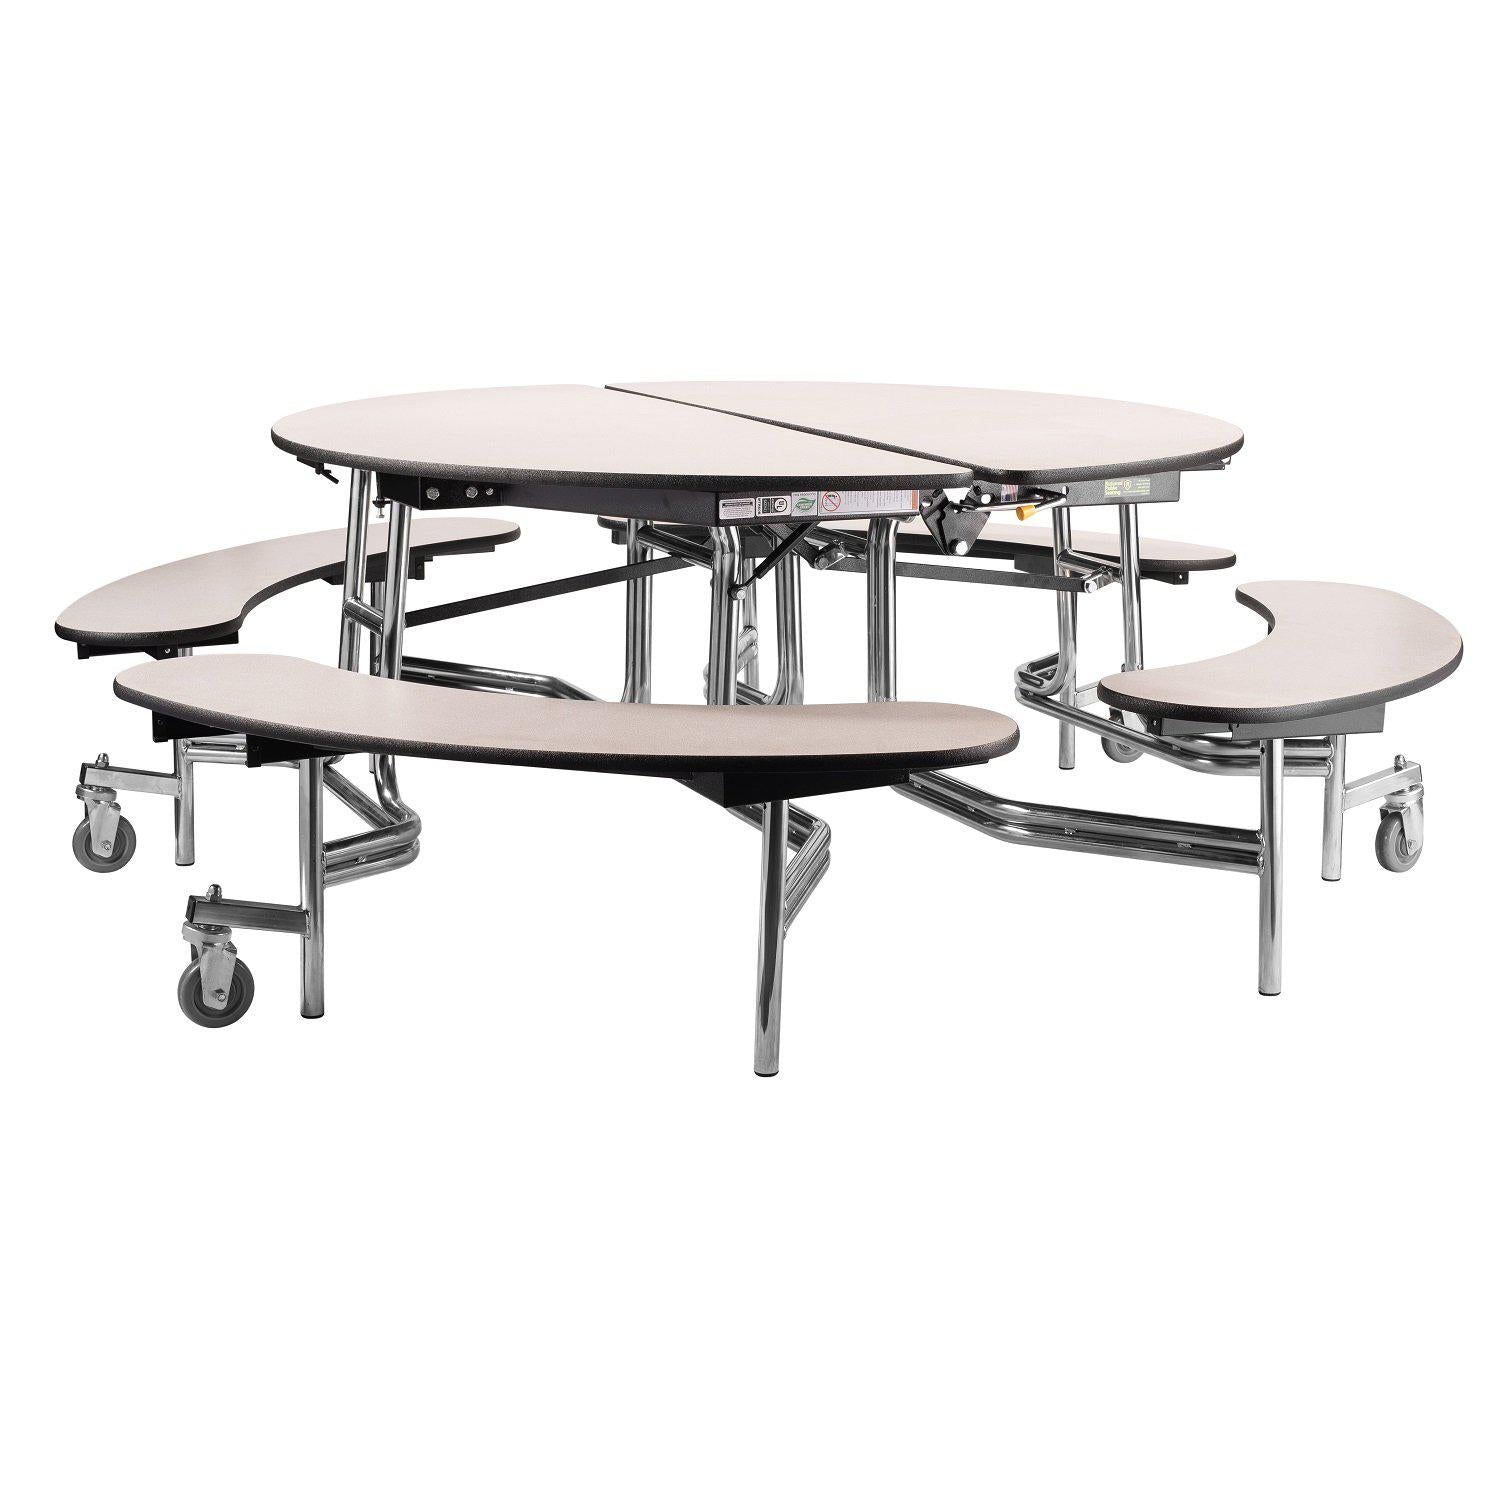 Mobile Cafeteria Table with Benches, 60" Round, Plywood Core, Vinyl T-Mold Edge, Chrome Frame